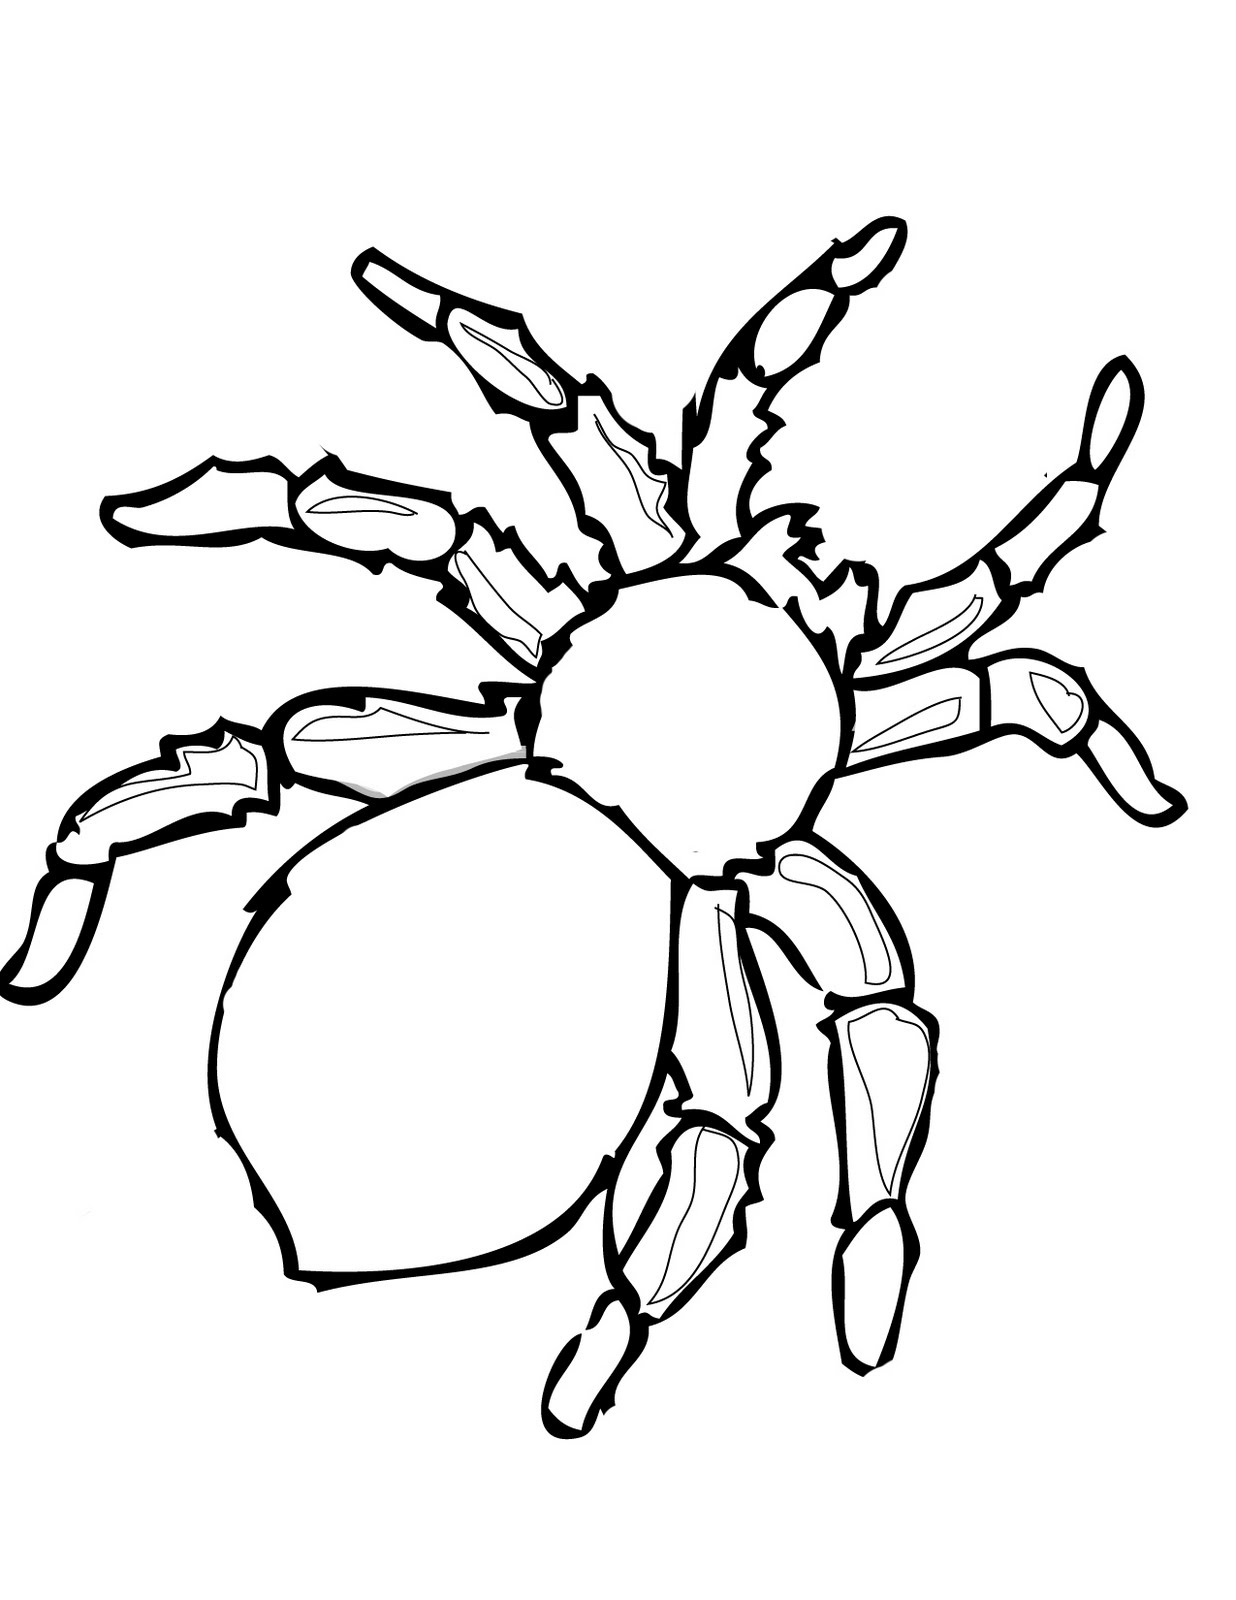  Spider Halloween Coloring Pages for Kids